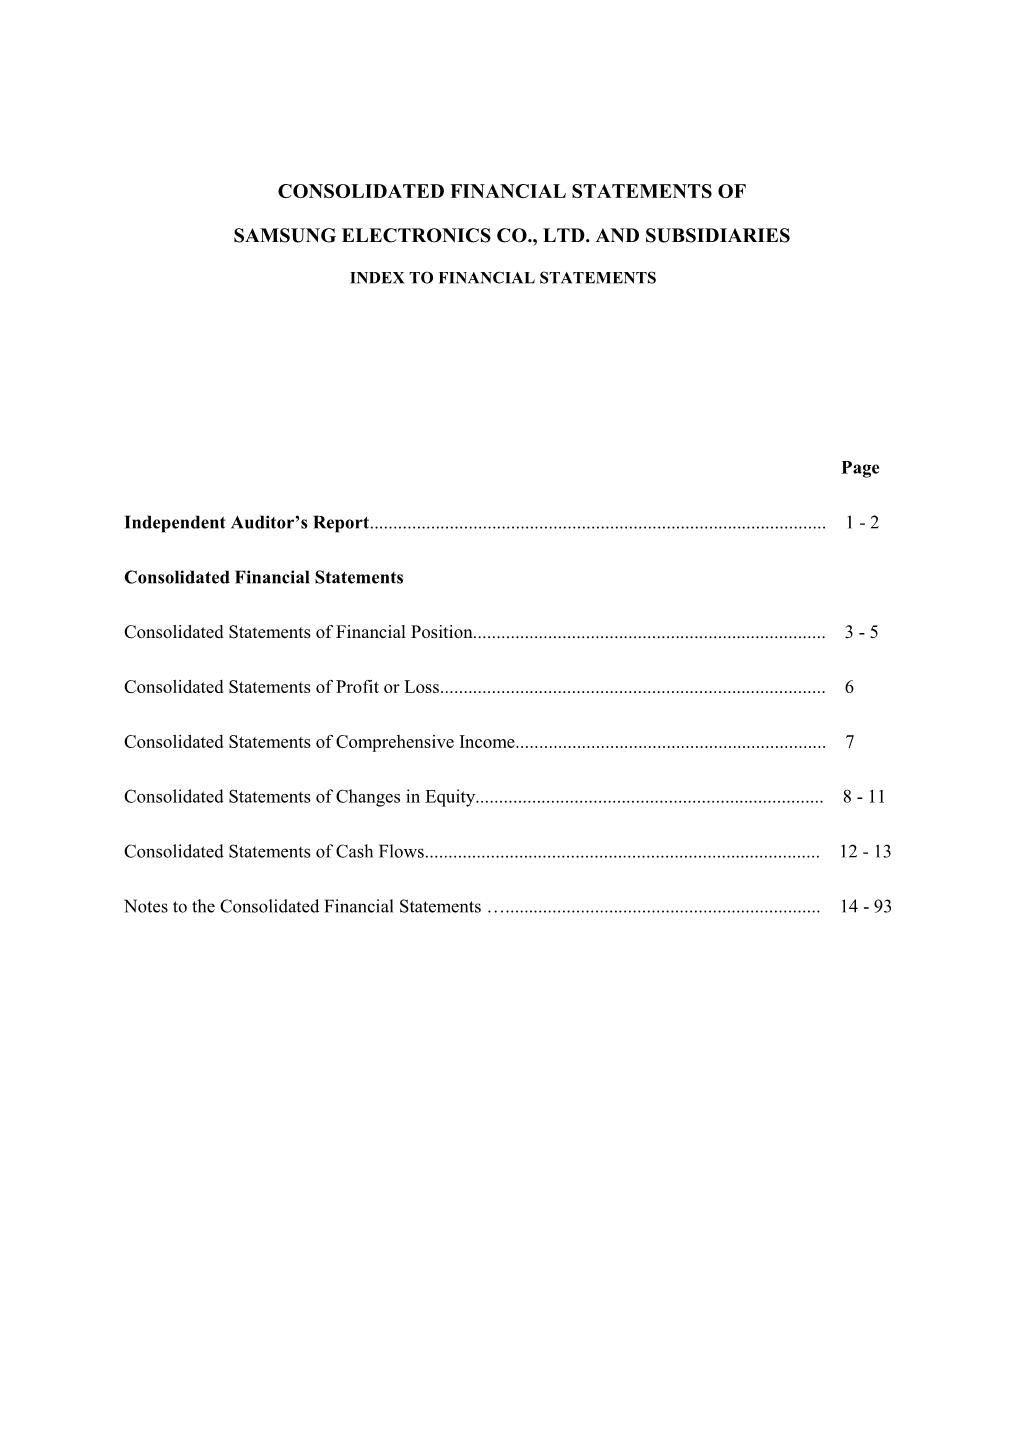 Consolidated Financial Statements of Samsung Electronics Co., Ltd. And